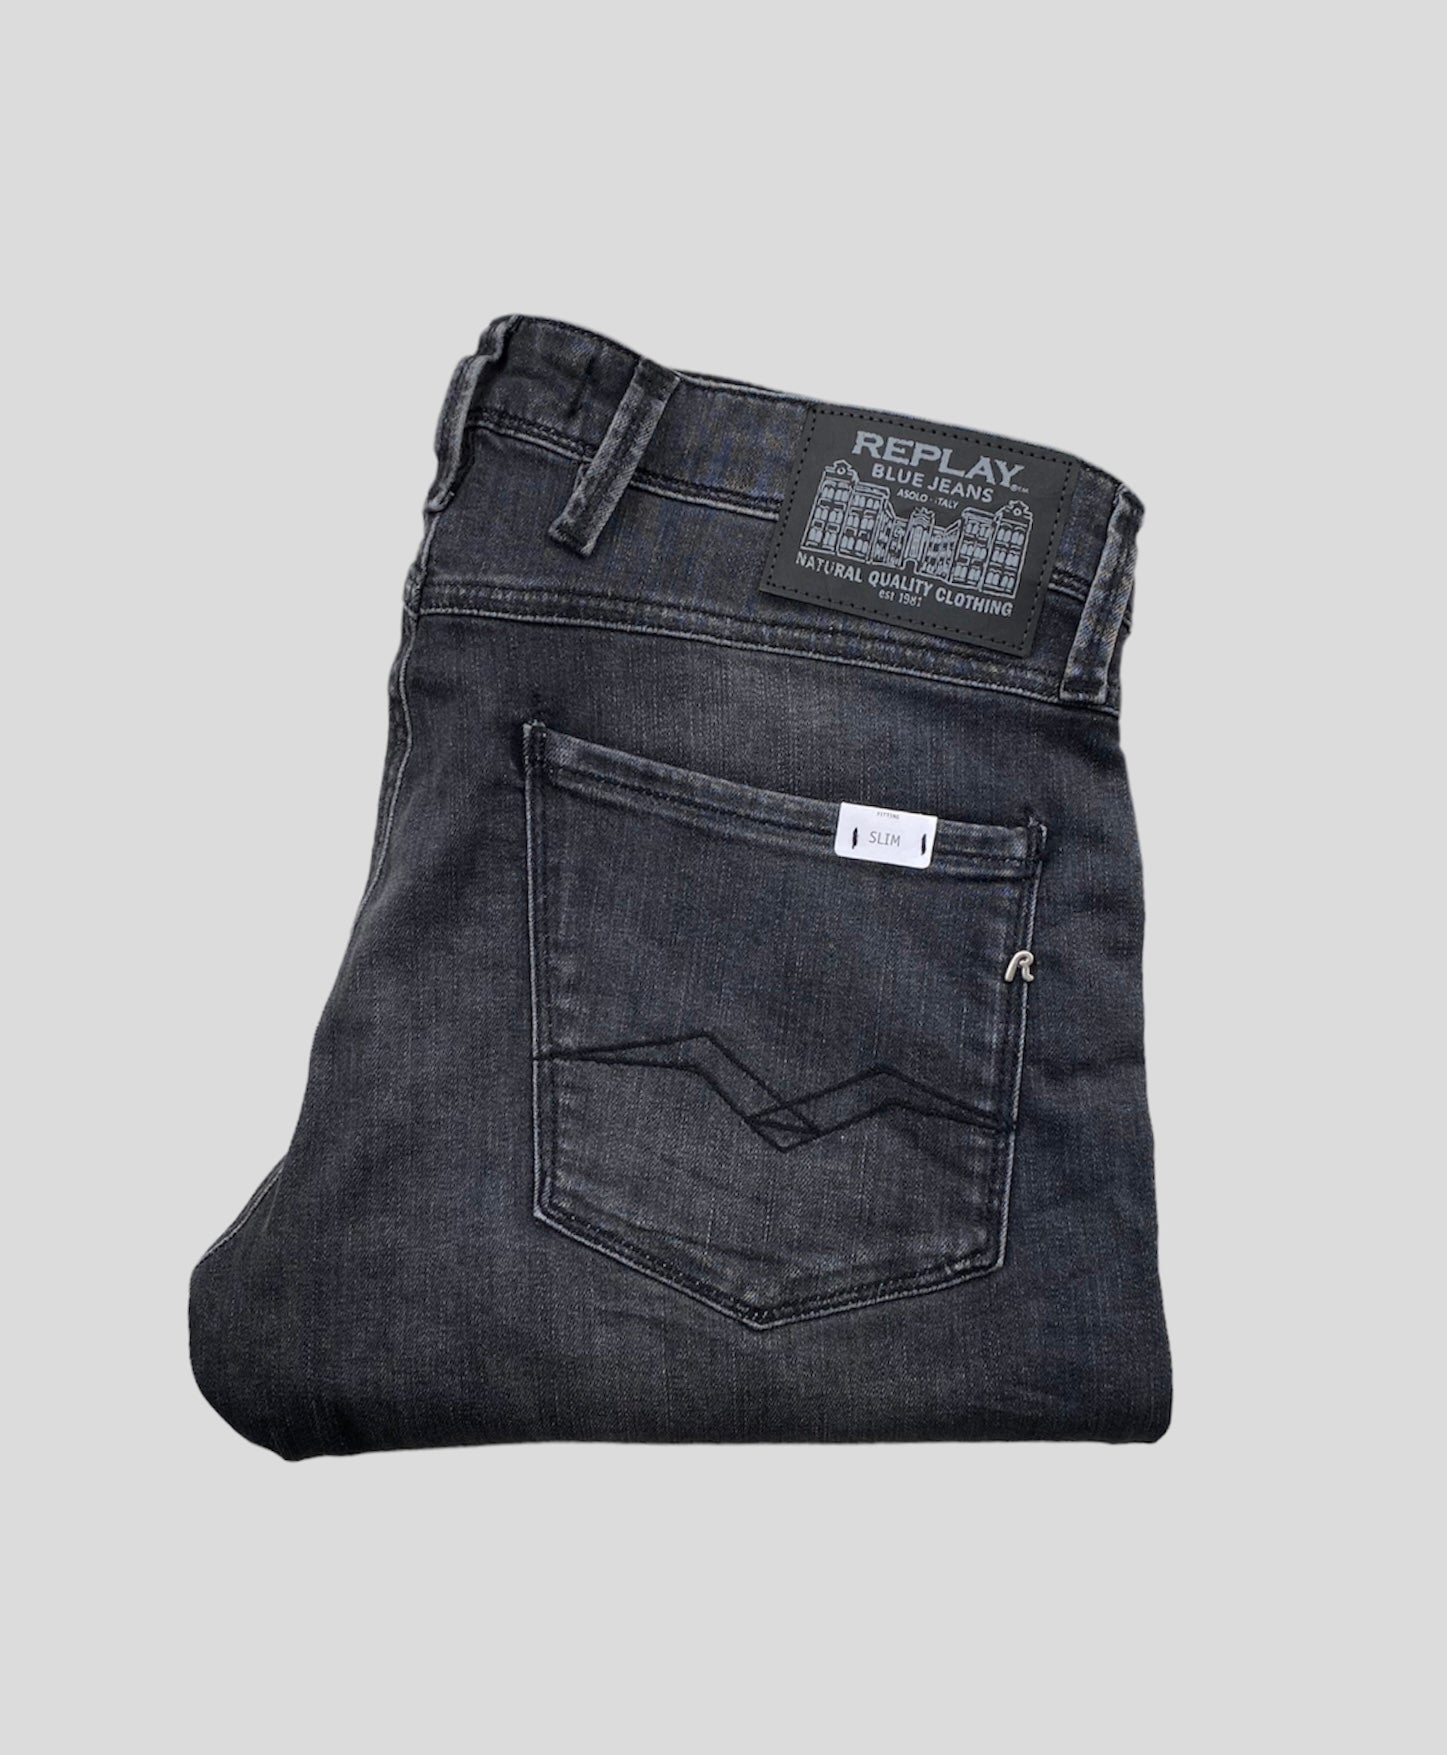 Replay "Power Stretch" Anbass Slim Fit Jeans Washed Black